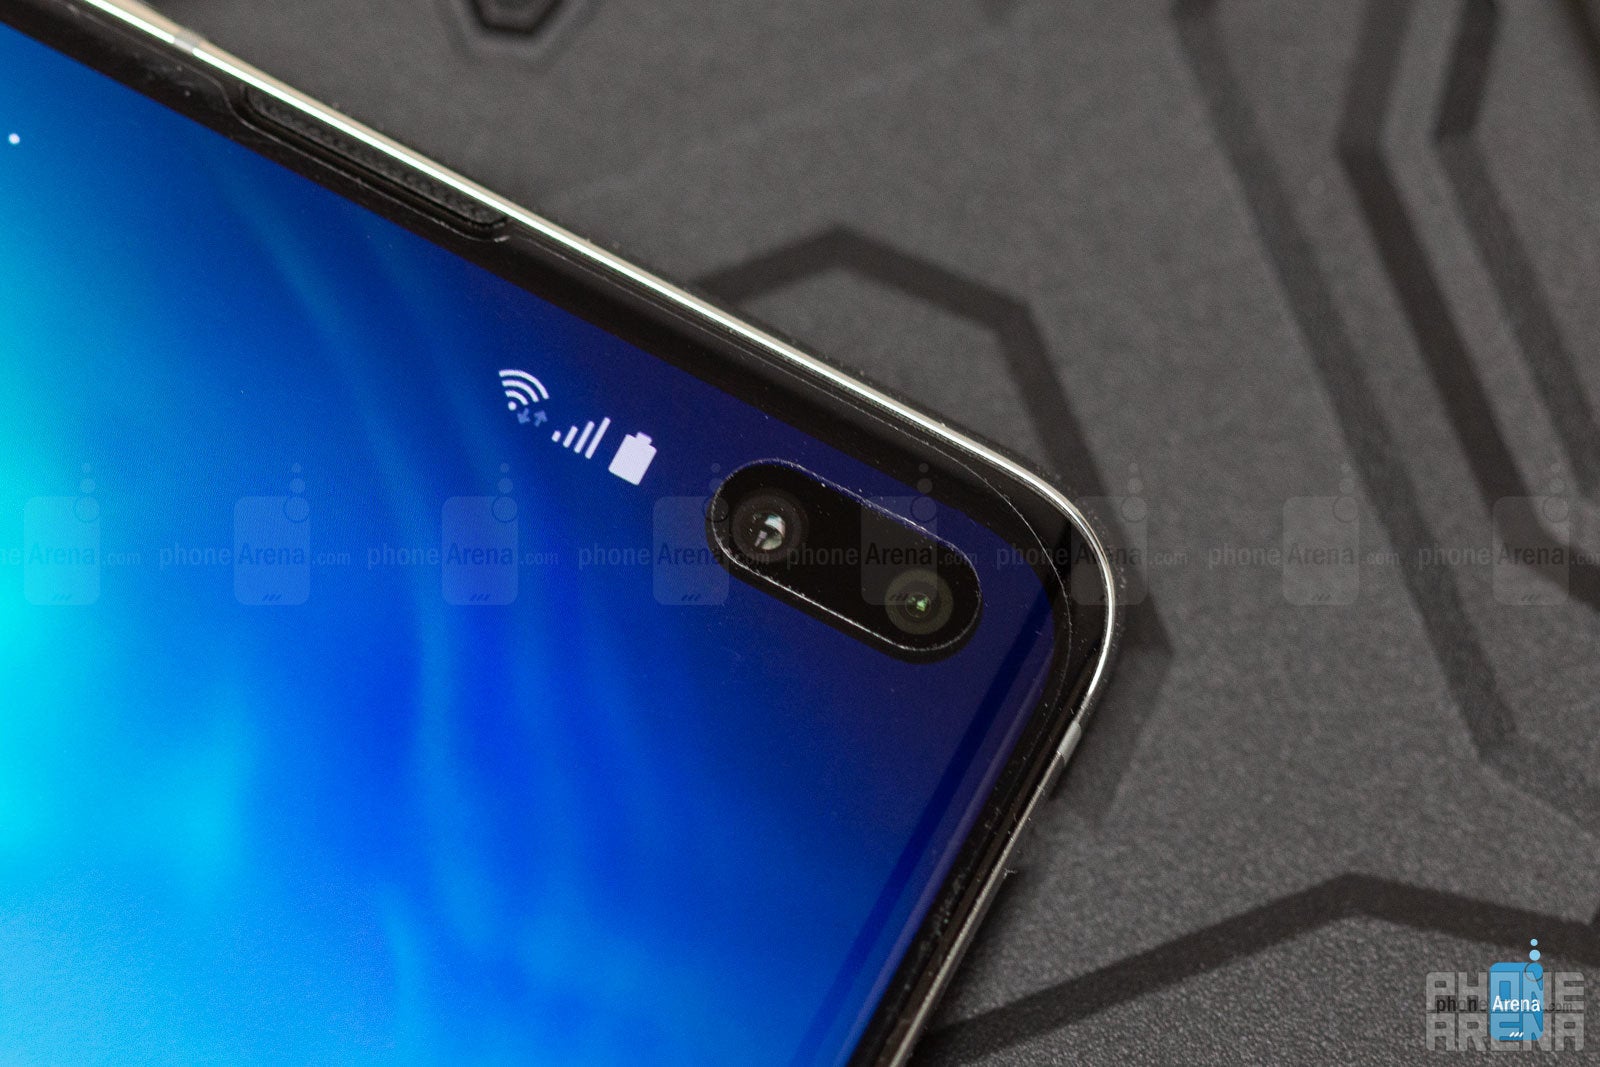 The S10 and S10+ already come with Samsung&#039;s official screen protector out of the box - Samsung: the best Galaxy S10 screen protector comes pre-installed, don&#039;t mess it up